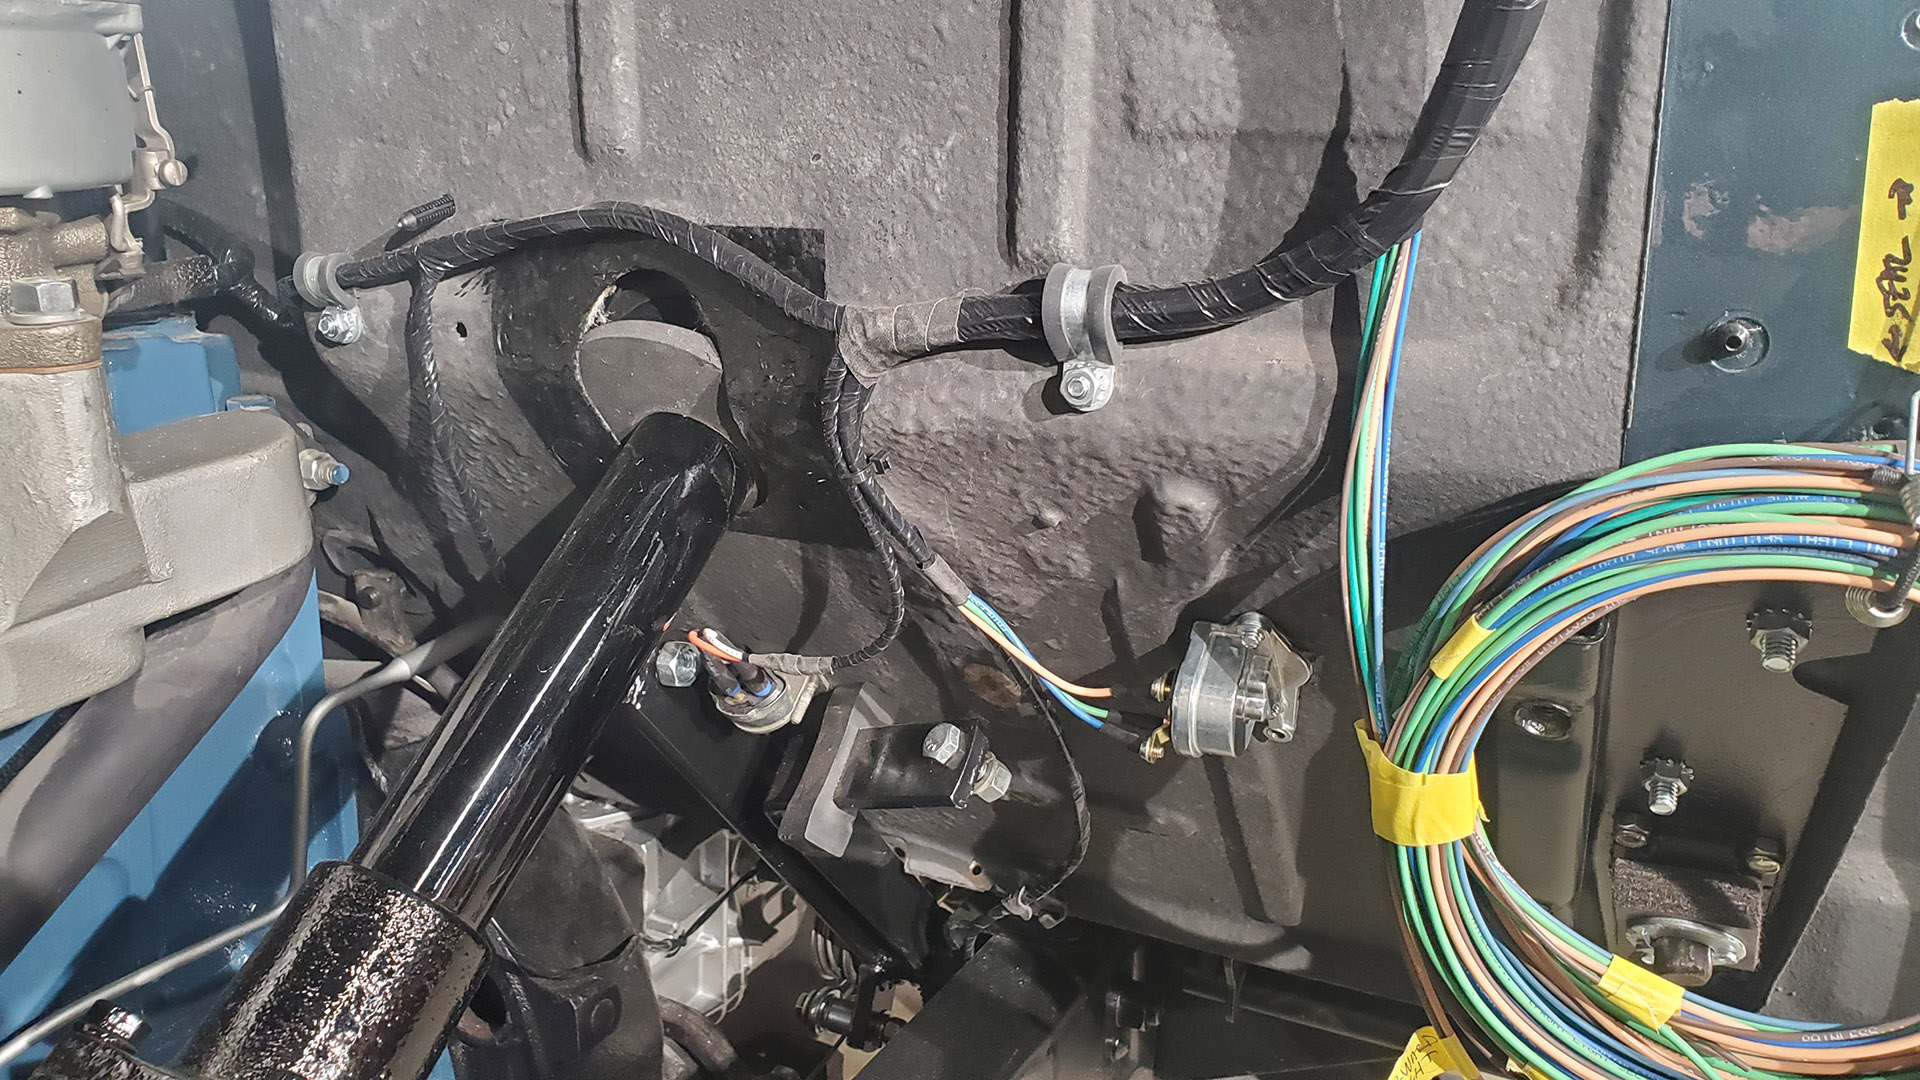 A small group of wires are rounted to the rear and other branches connect to the dimmer switch, brake light switch, and oil pressure sender (off camera). The bundle of unwrapped wires will get routed to the front lighting once the front clip is reinstalled.